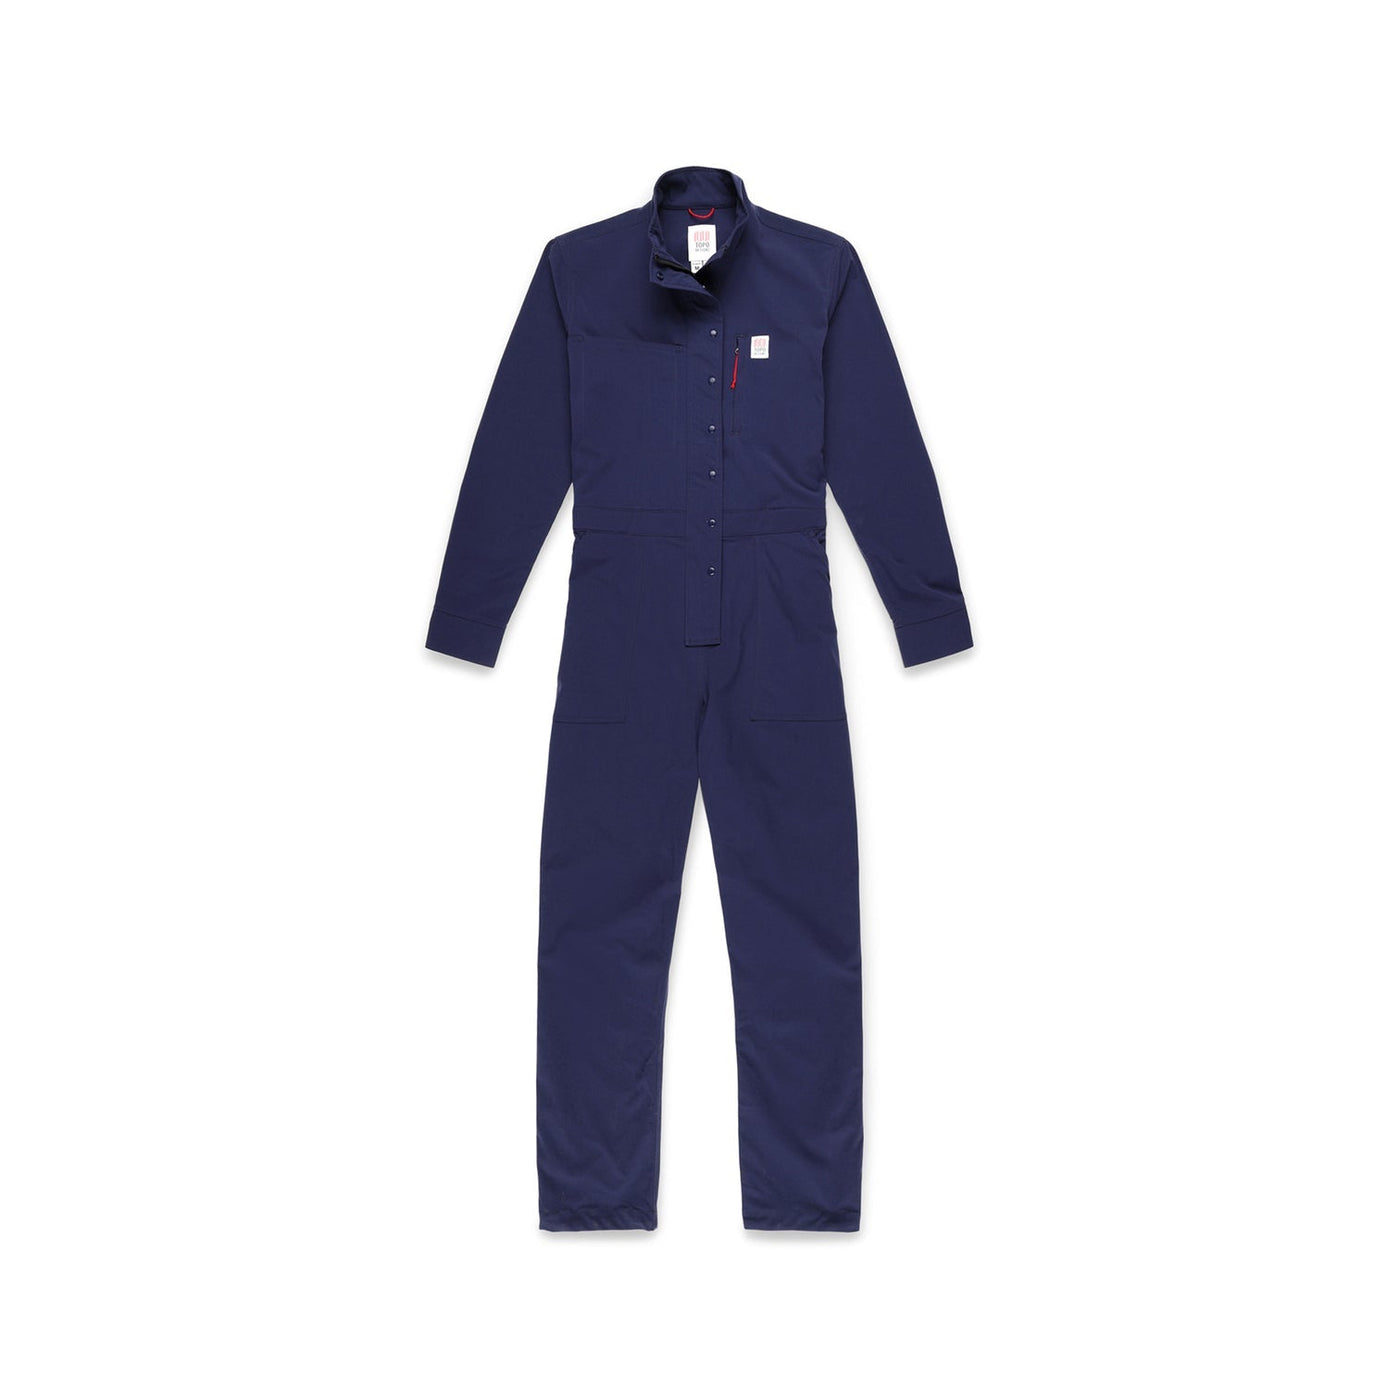 Women's Coverall - The Lake and Company